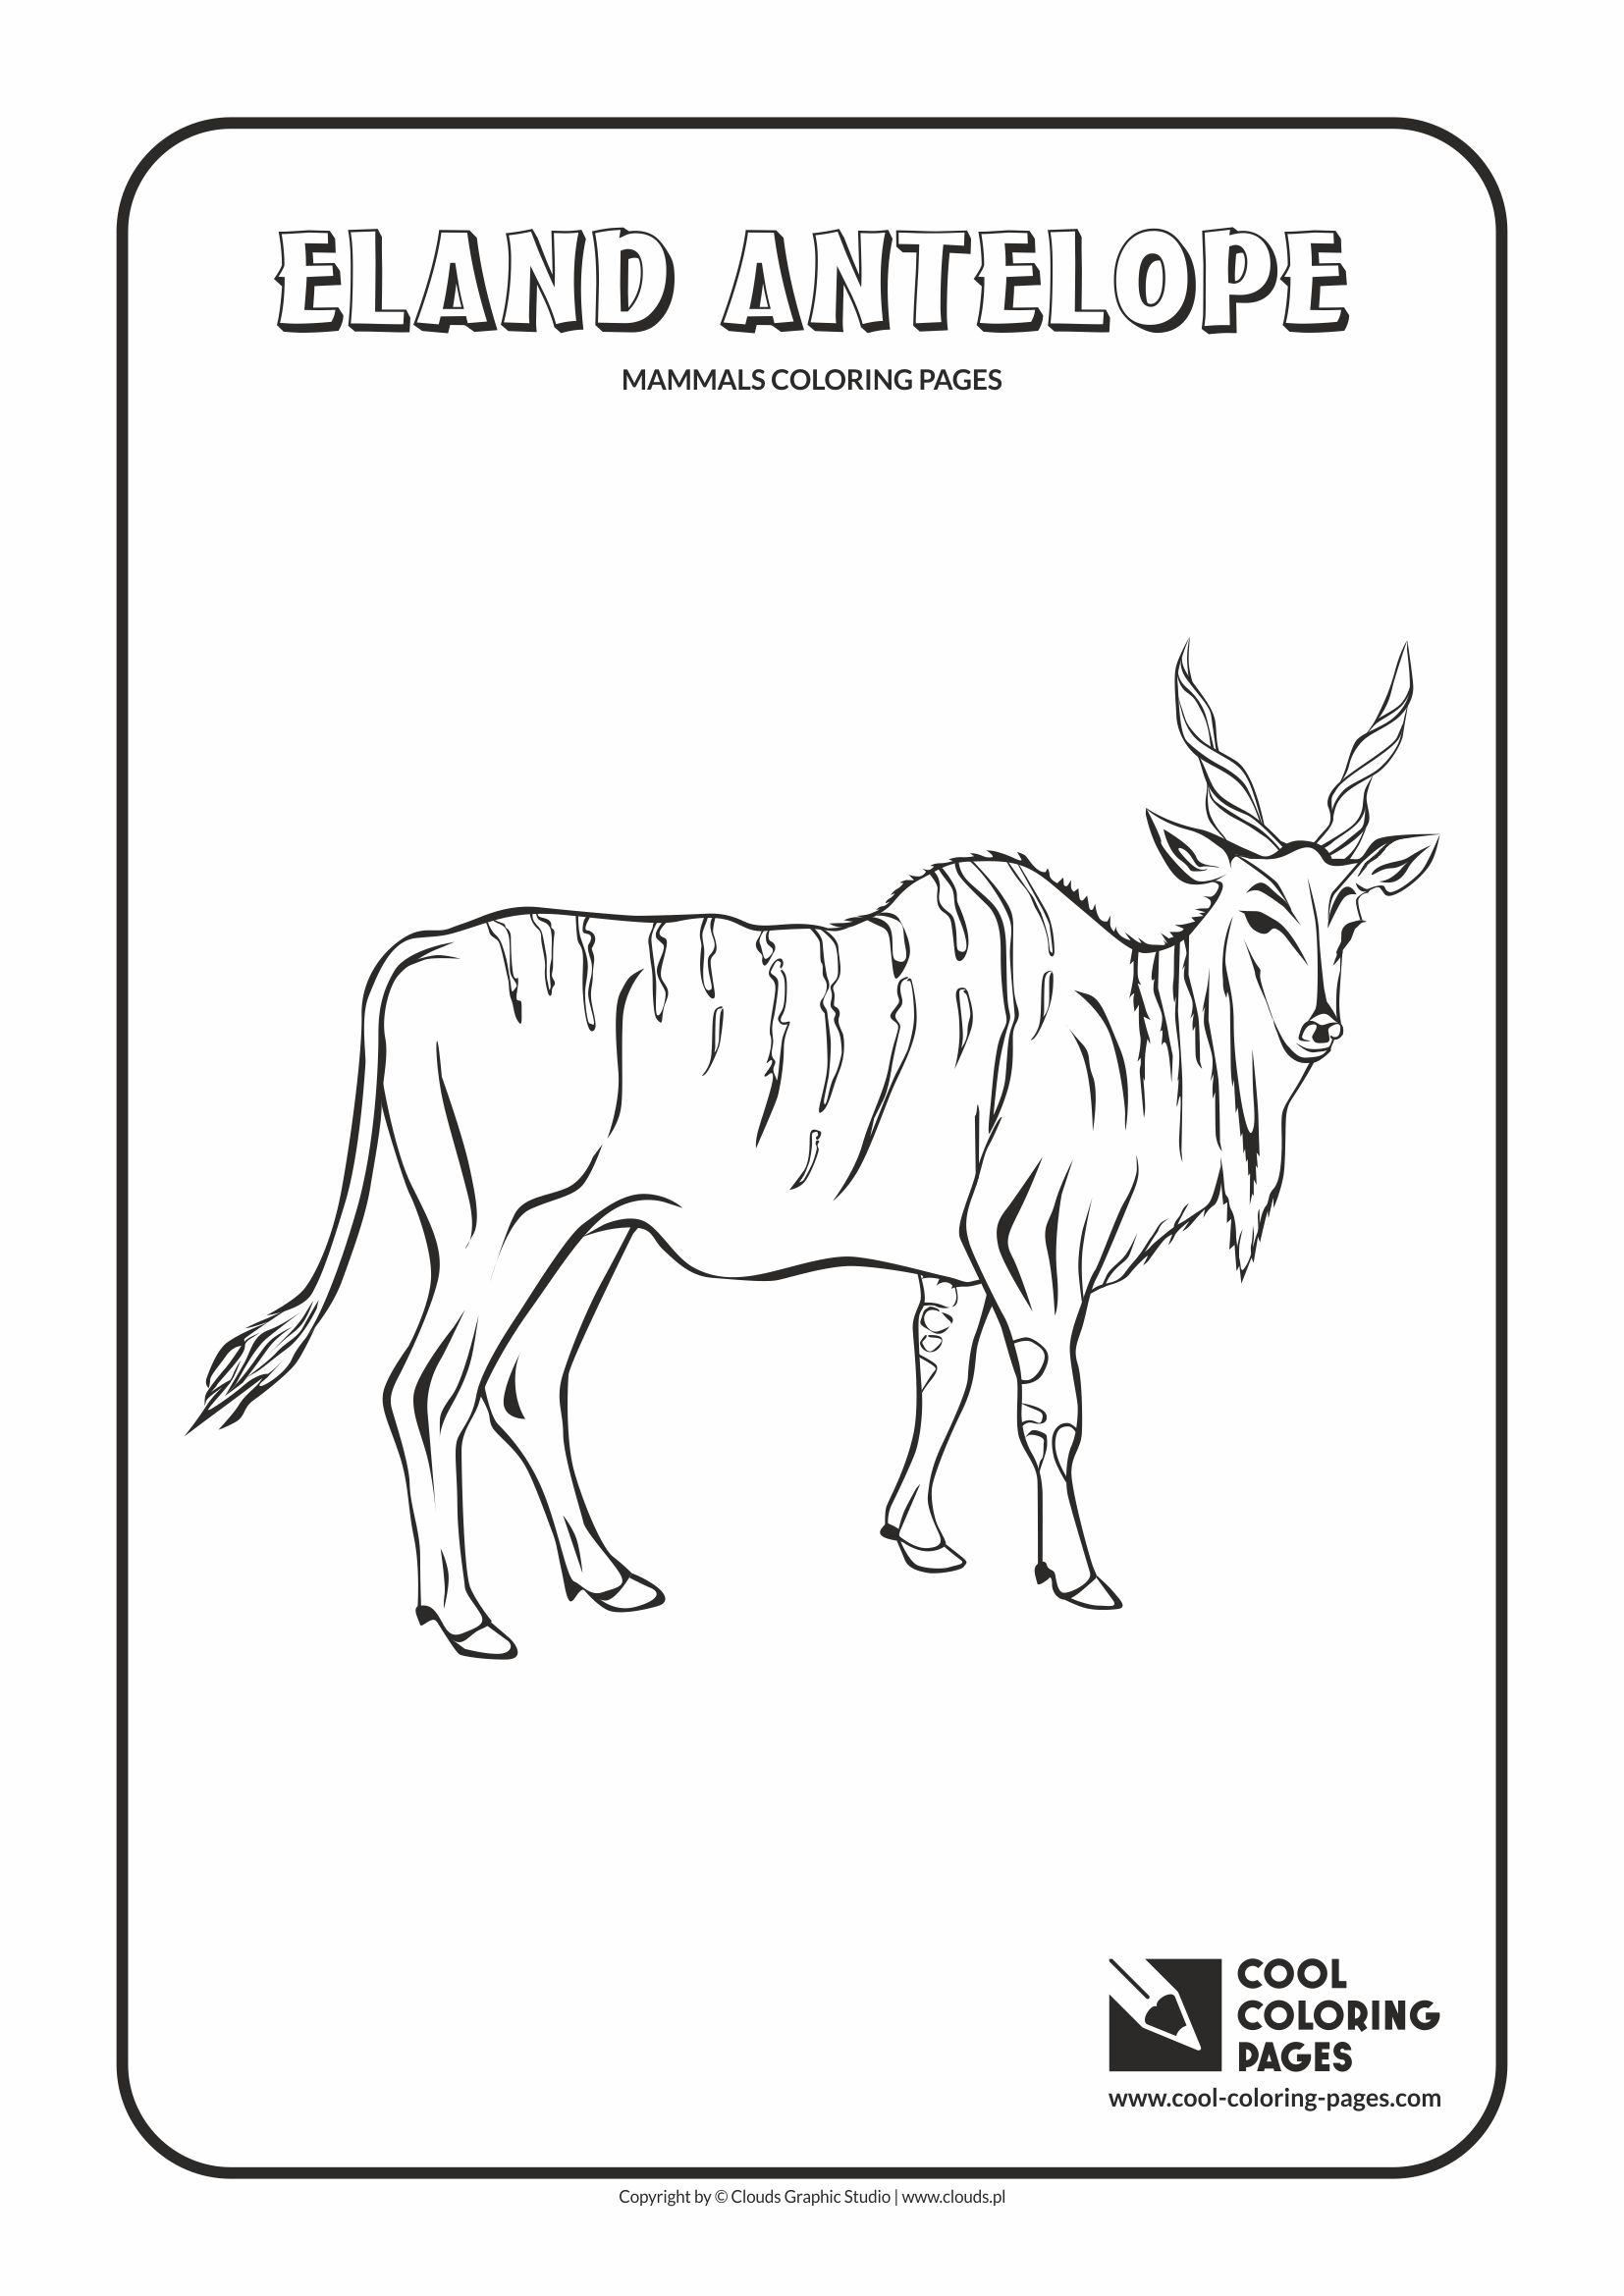 Download Mammals Antelopes Cartoon Antelopes Coloring Pages Printable - KINDERPAGES.COM